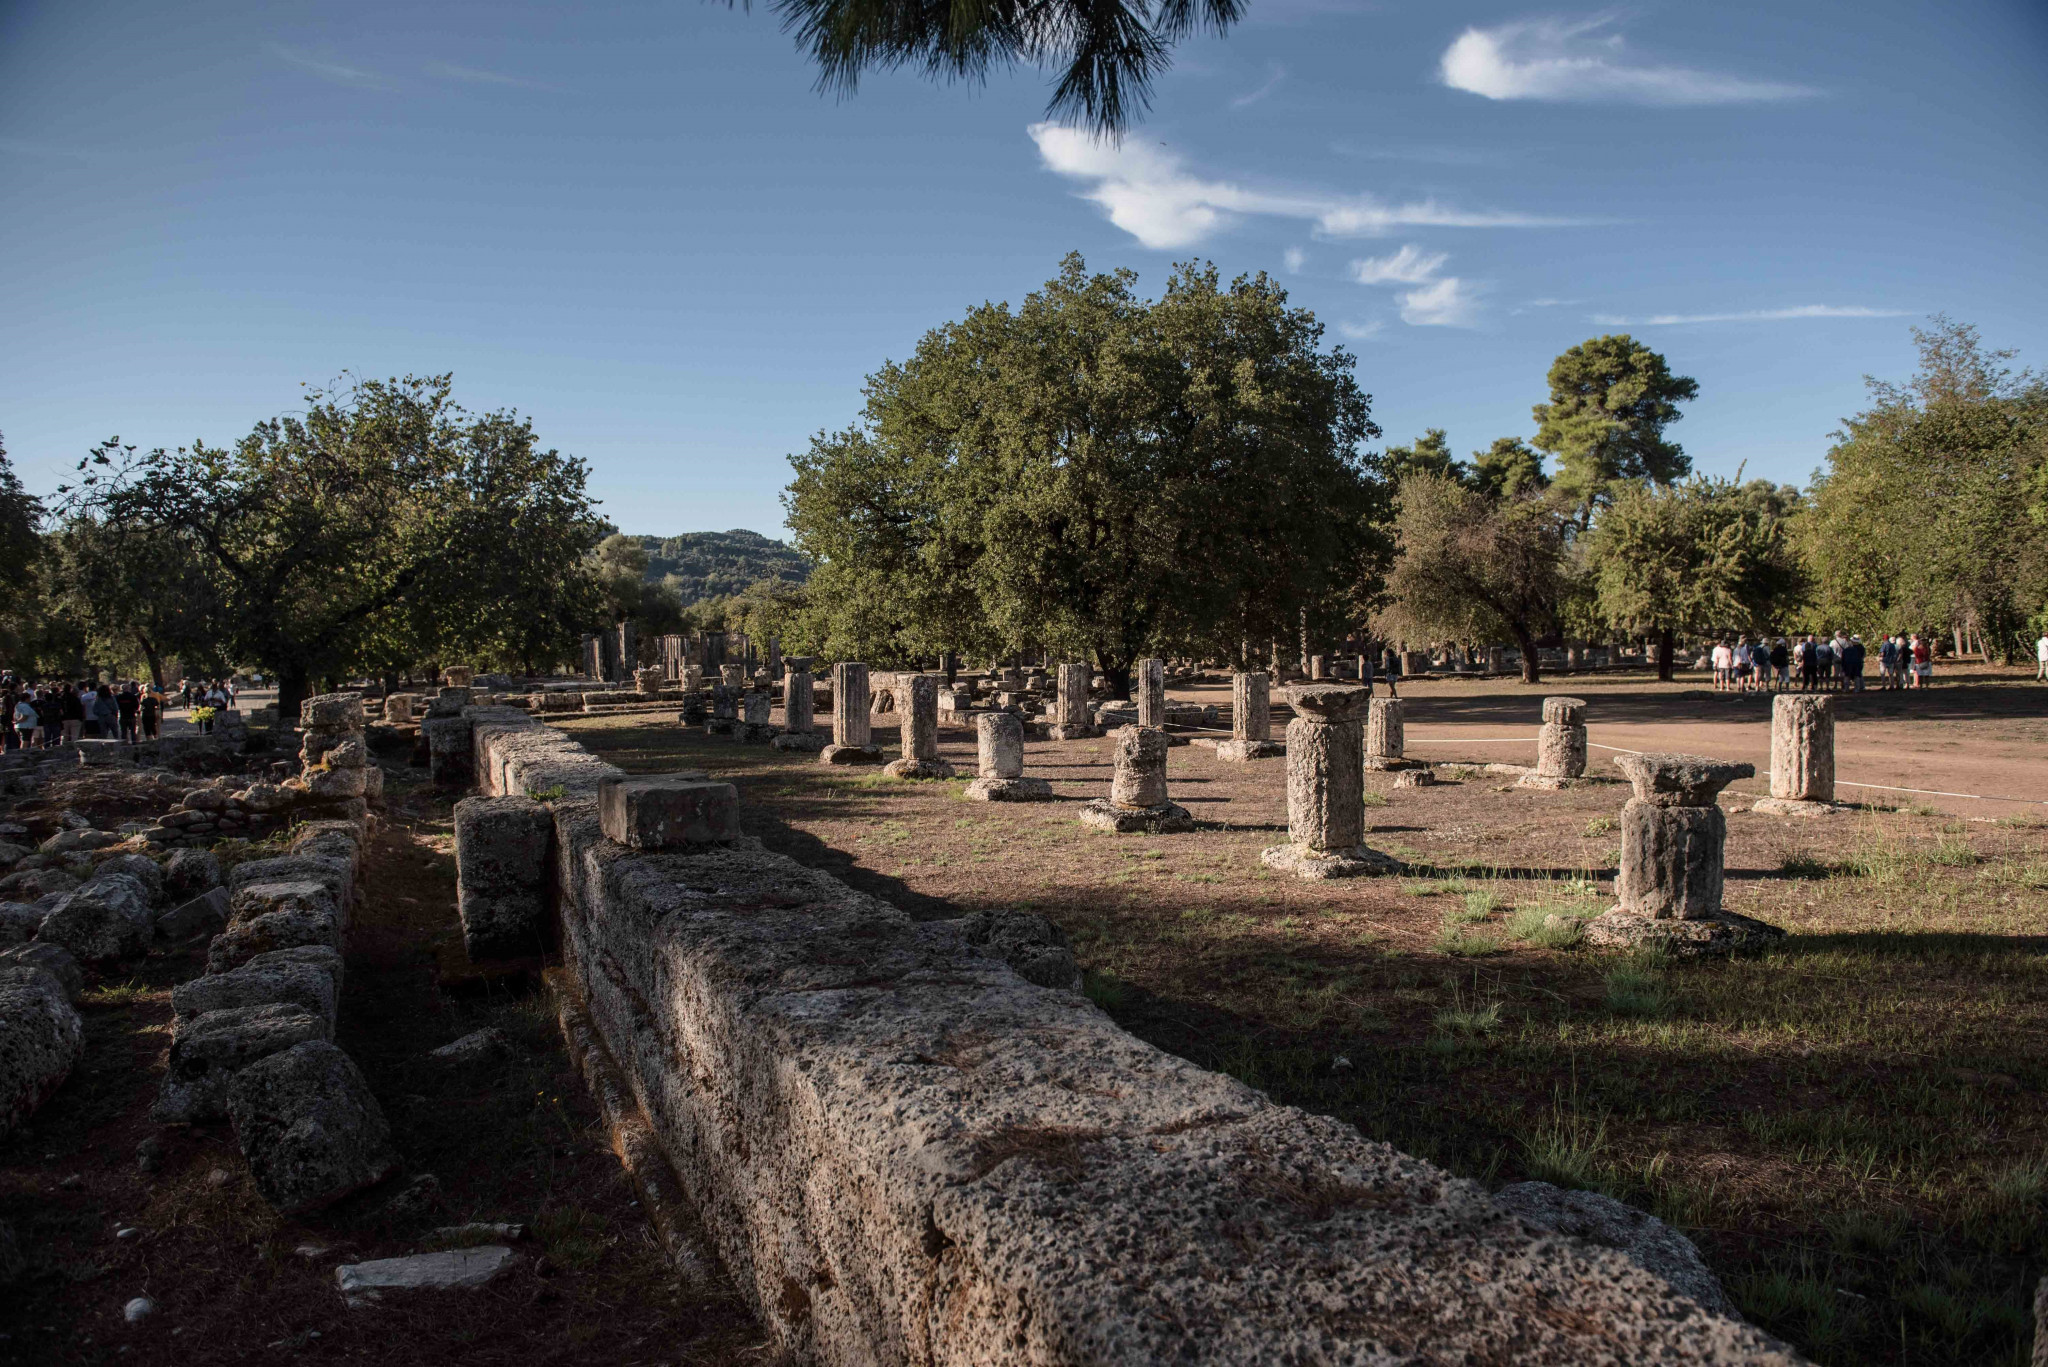 A mixed team competition at Ancient Olympia in Greece and street events in Lausanne and Jamaica are the latest innovations on the weightlifting calendar ©EOC